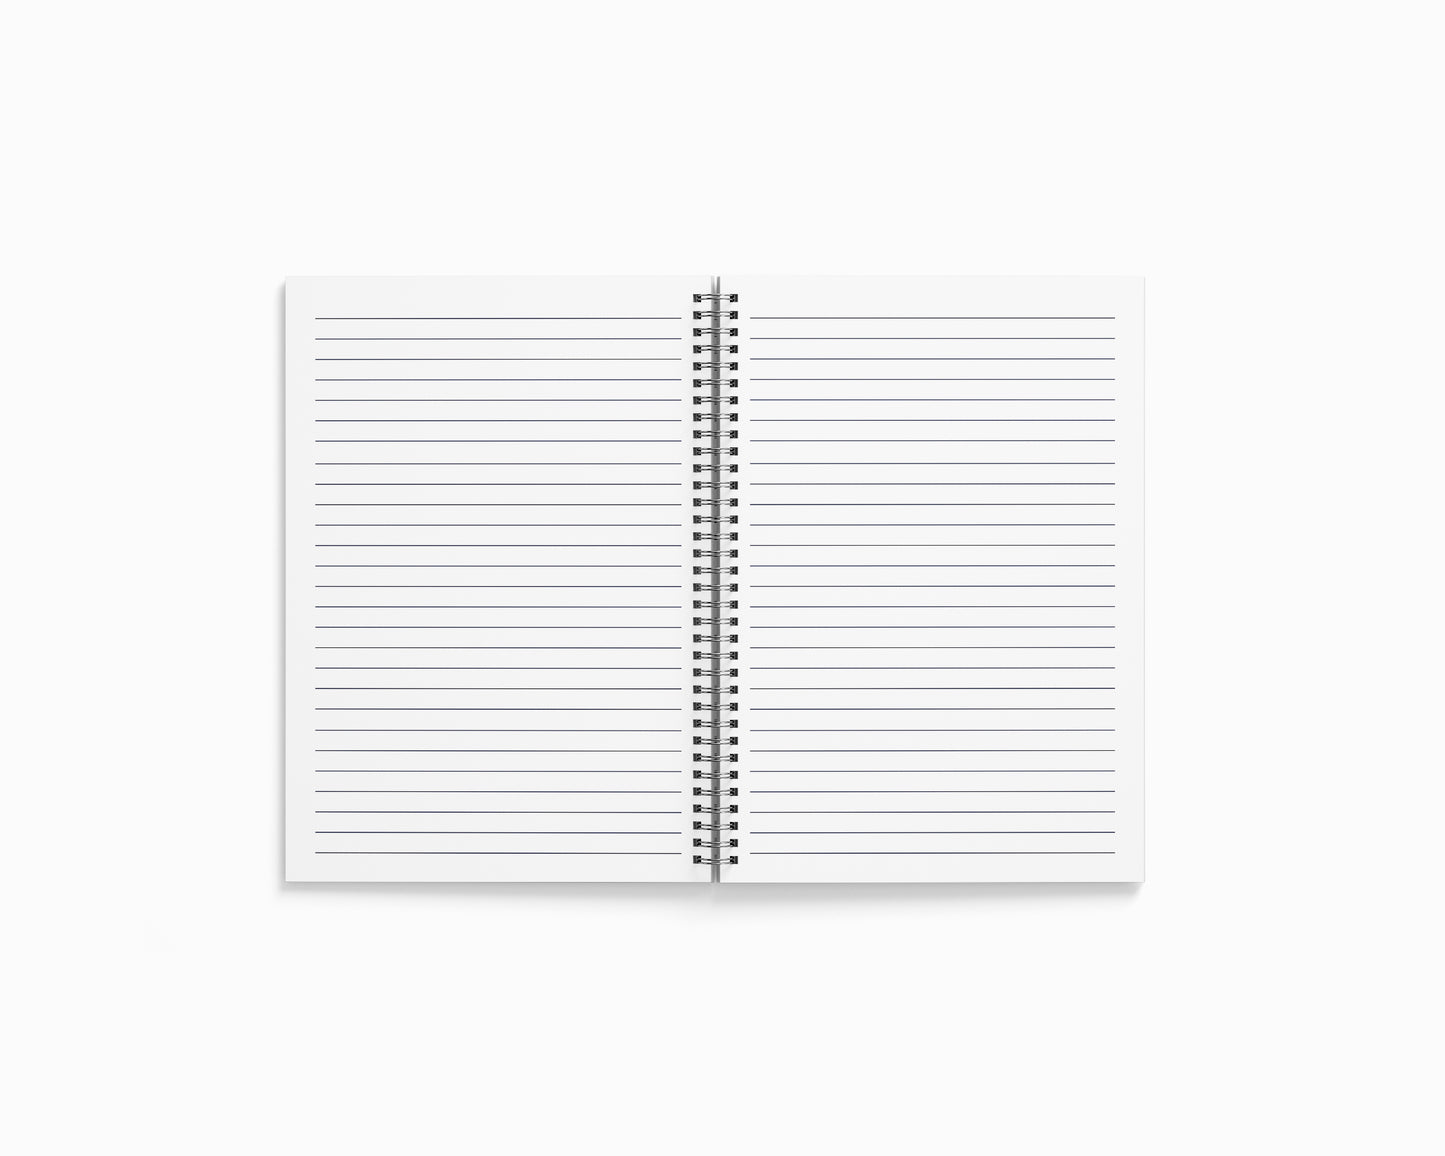 Chintamani Notebook (A5 Size, 100 Pages, Ruled)